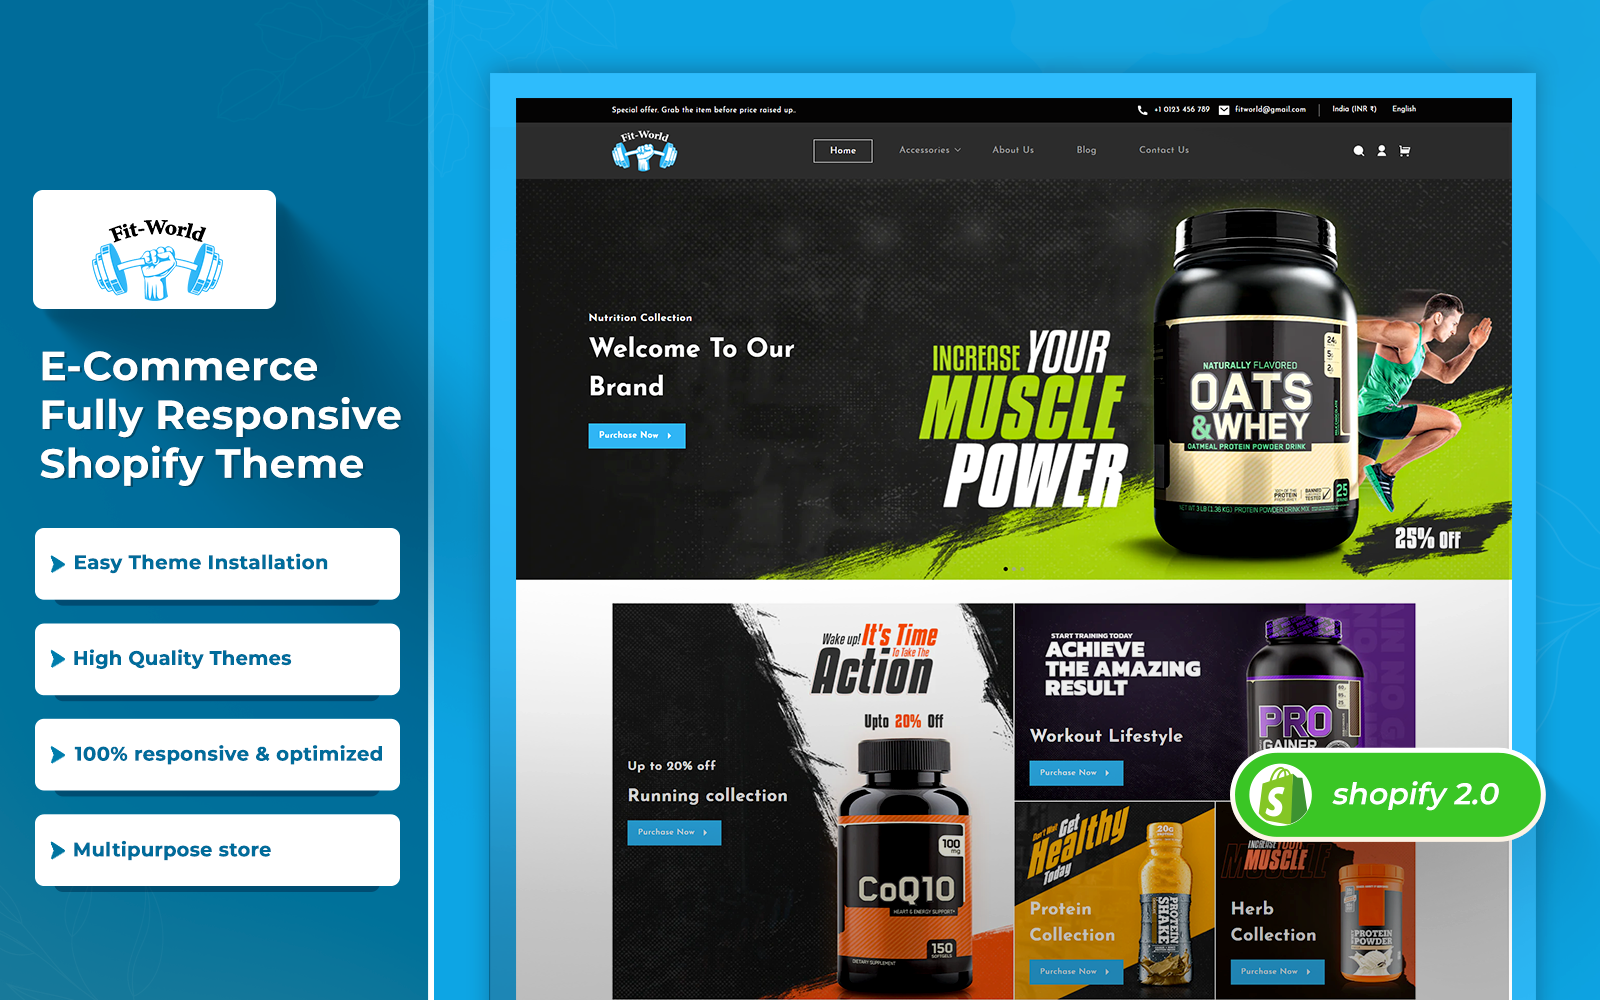 Fitworld - Gym Body Fitness & Halloween Costumes Store Multipurpose Shopify 2.0 Responsive Theme